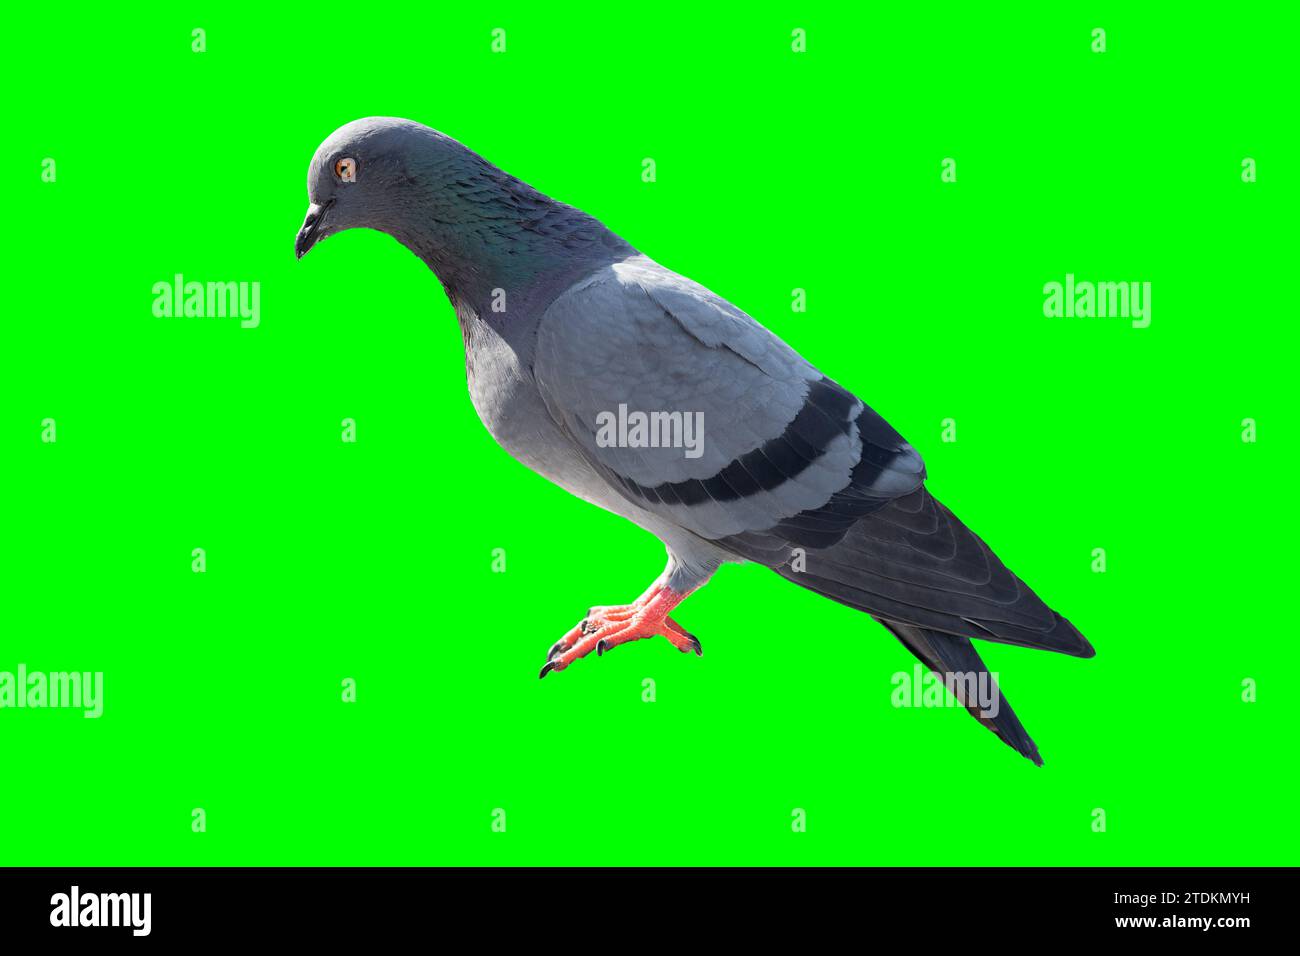 pigeon bird catching stand side view isolated on green screen with clipping path for video graphics design animal object Stock Photo